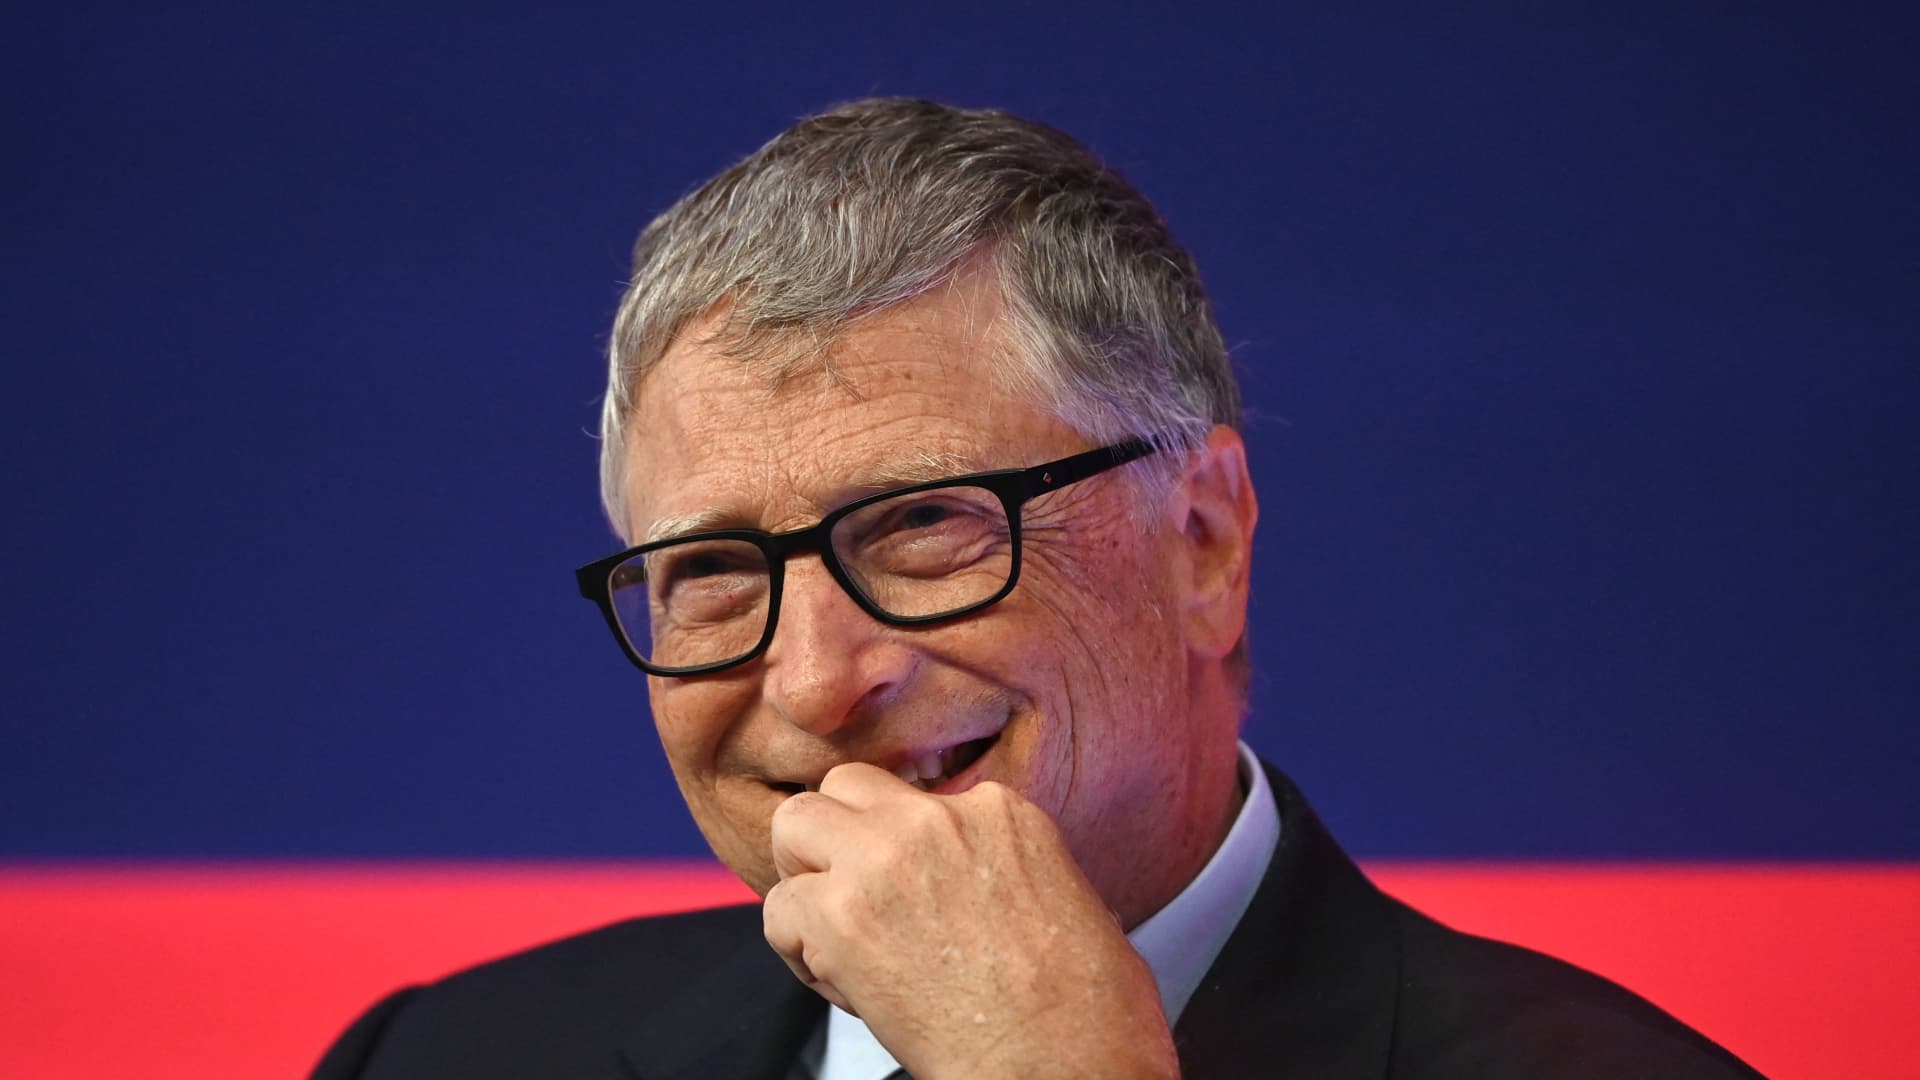 Bill Gates thinks A.I. like ChatGPT is the ‘most important’ innovation right now